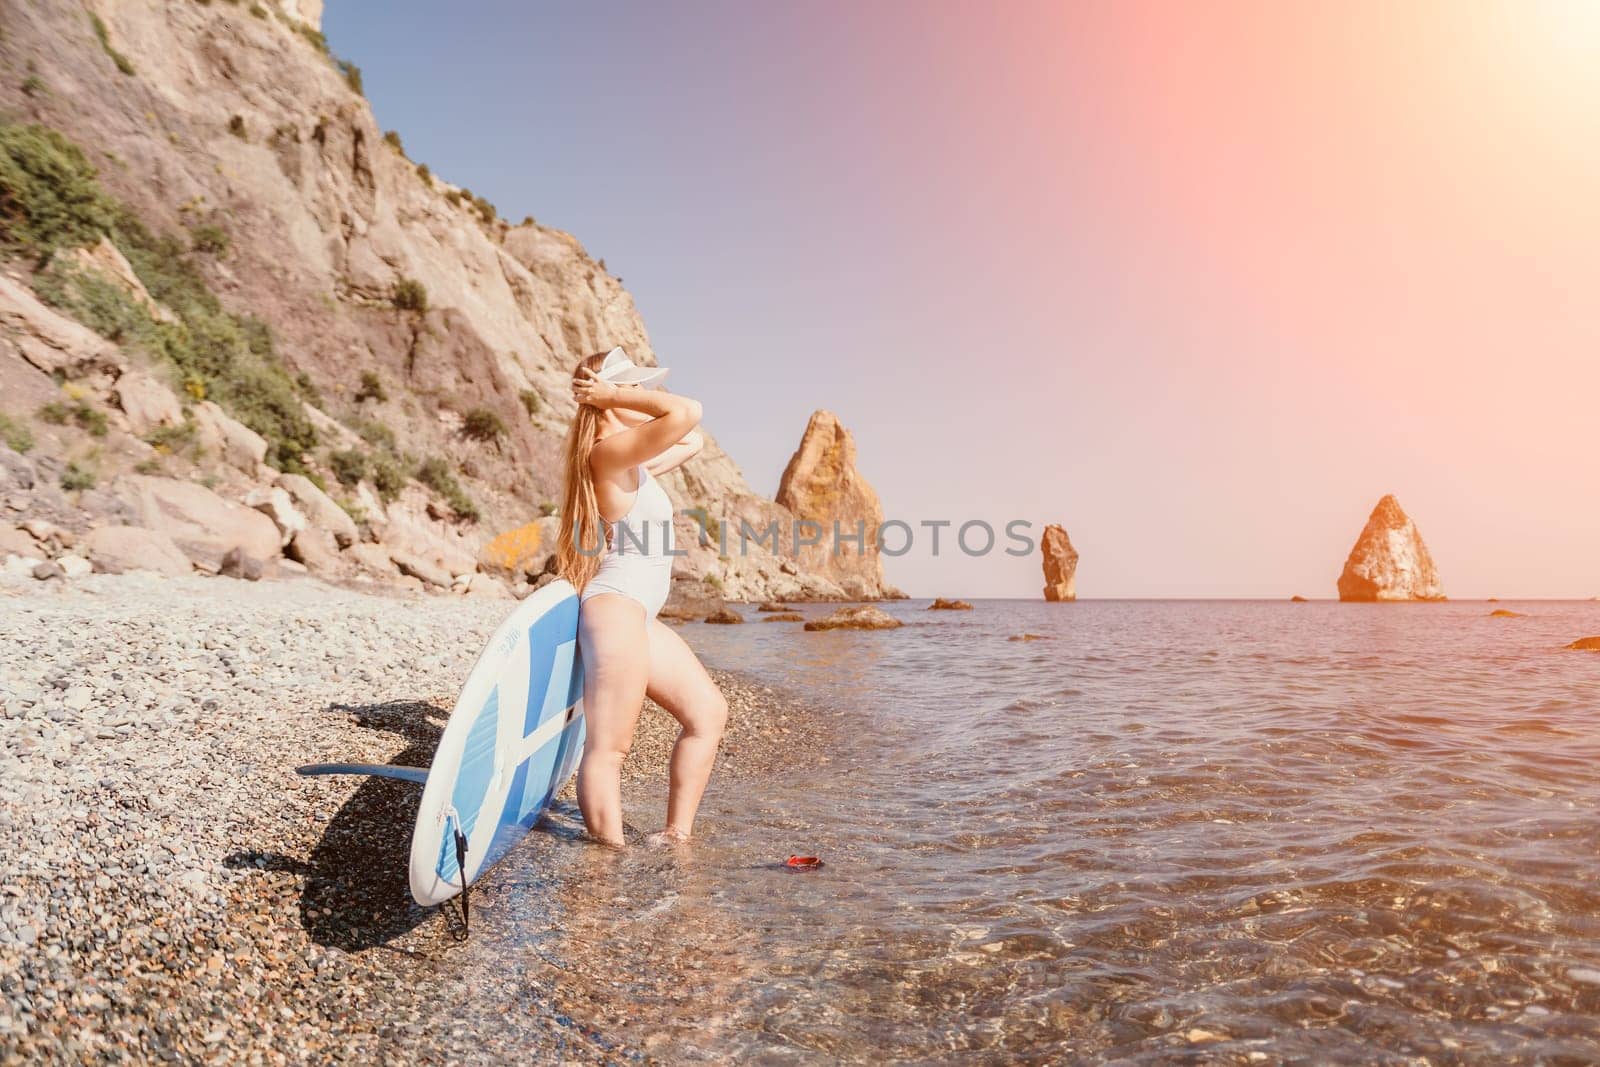 Woman sea sup. Close up portrait of happy young caucasian woman with long hair looking at camera and smiling. Cute woman portrait in a white bikini posing on sup board in the sea by panophotograph